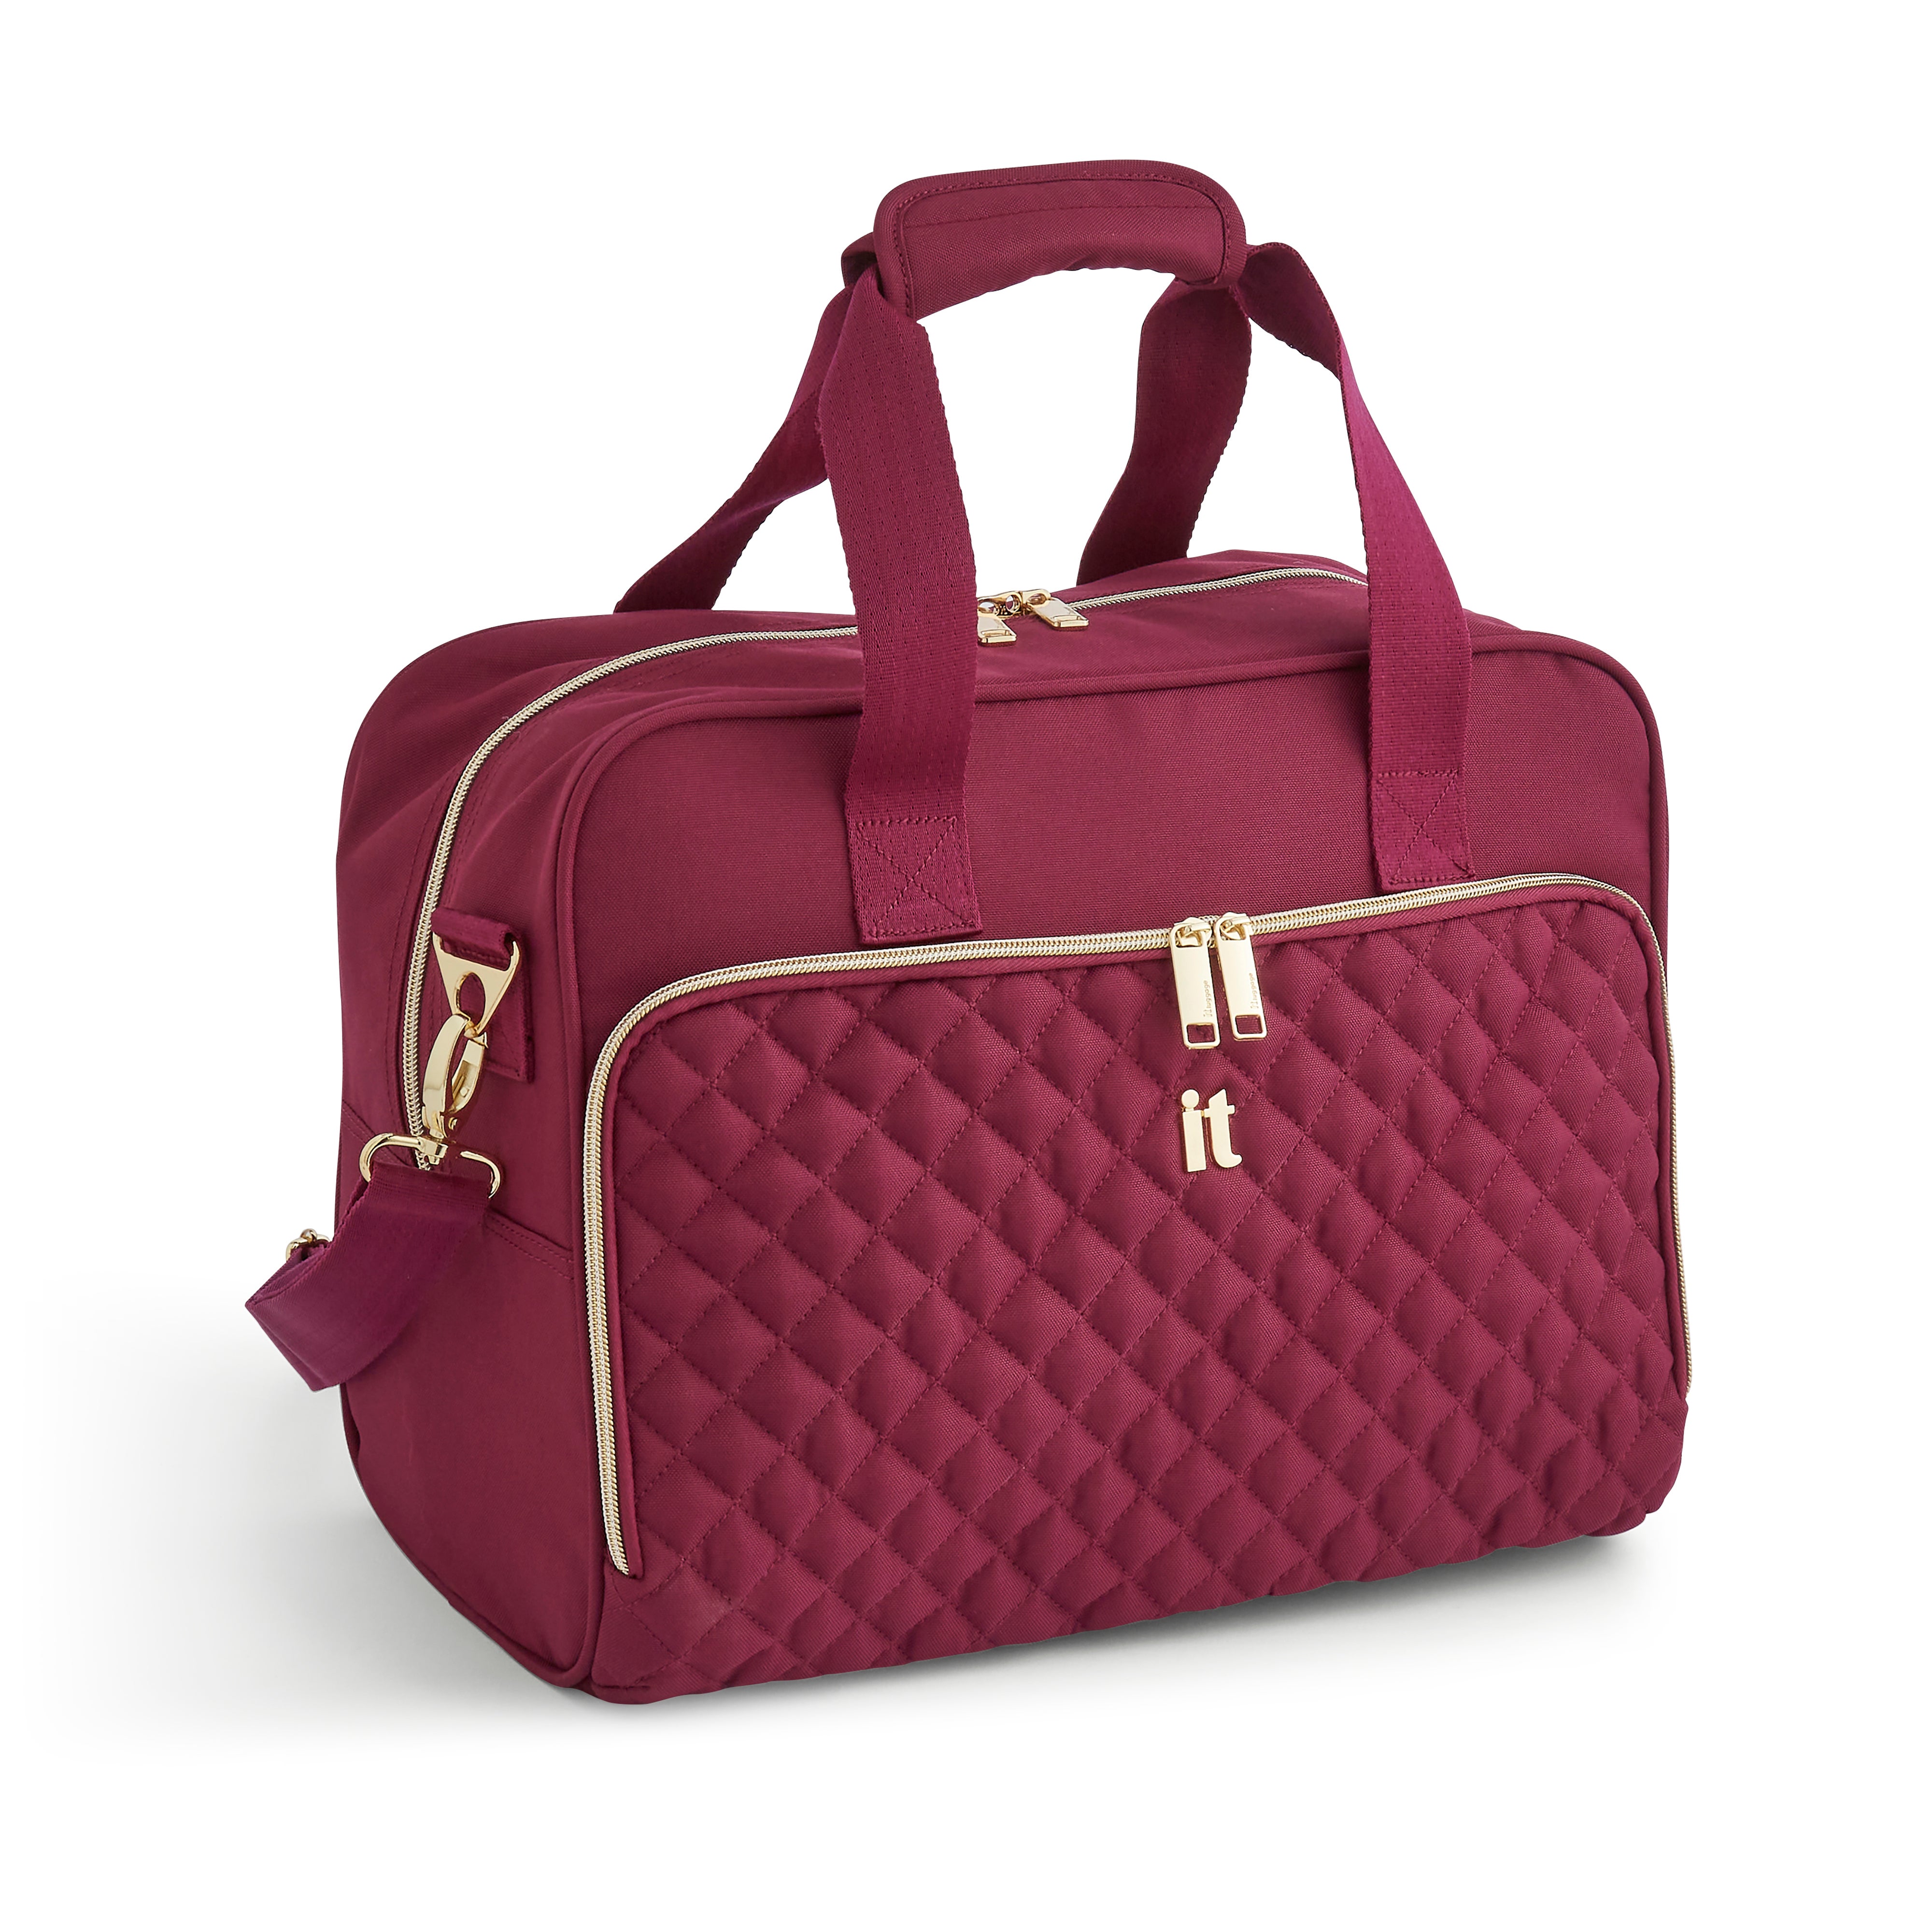 IT Luggage Divinity Quilted Holdall | Dunelm